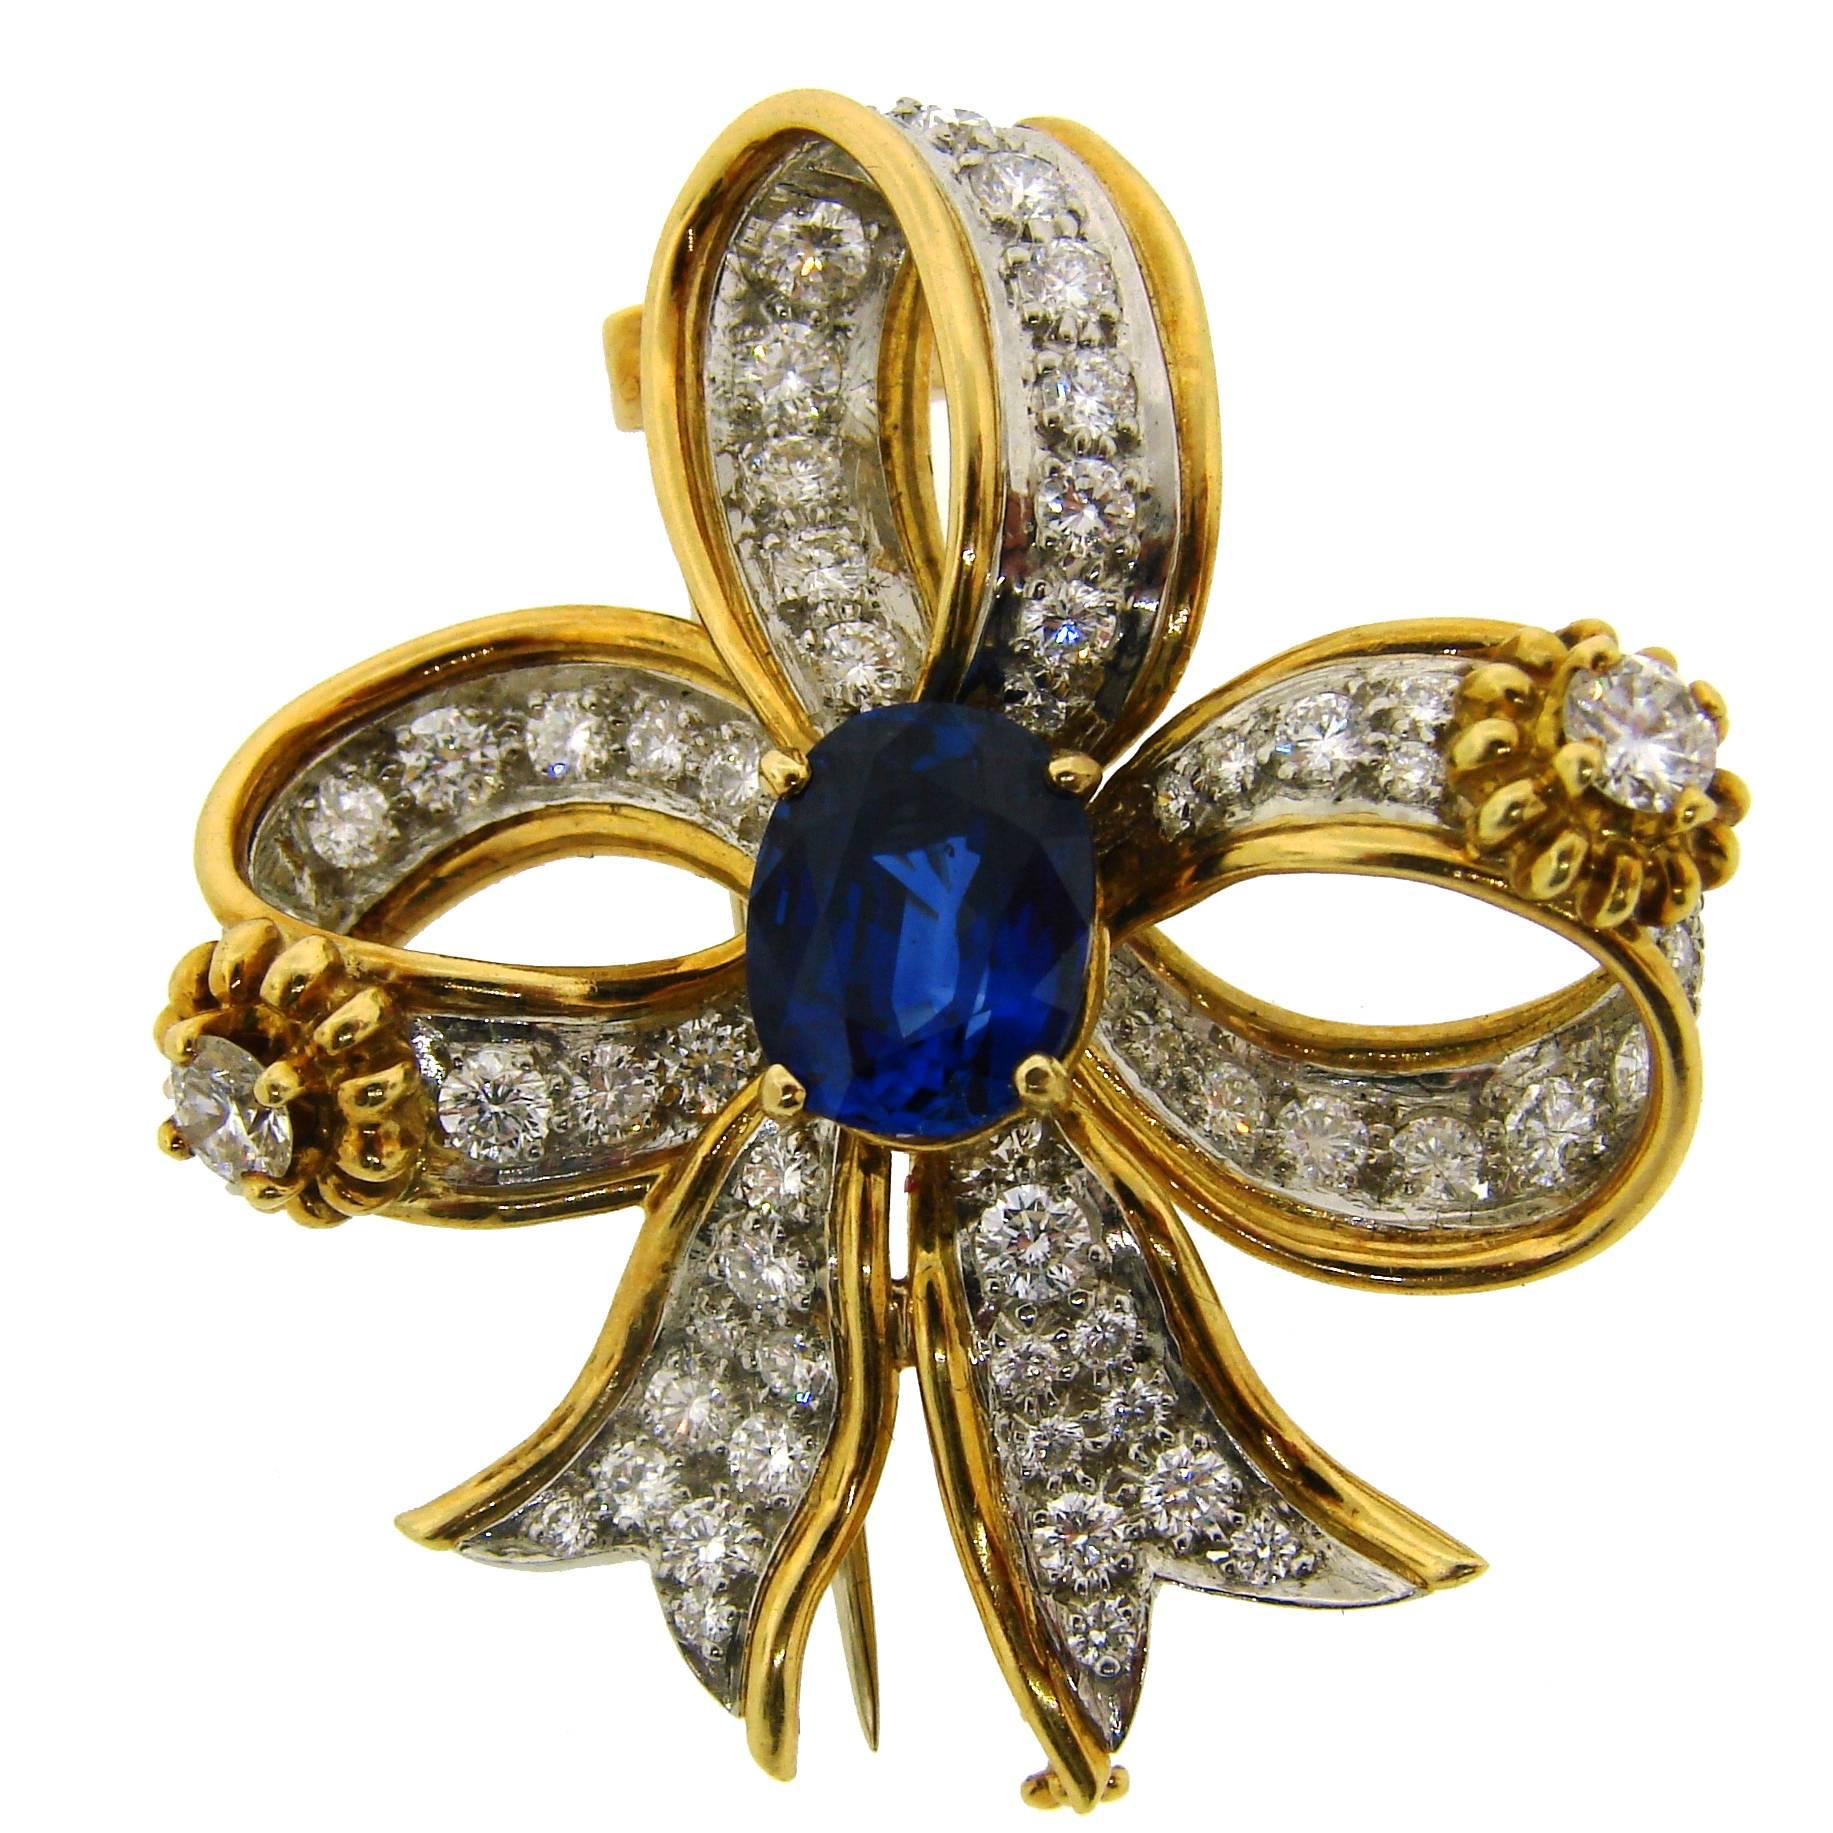 1950s Tiffany & Co. Schlumberger Sapphire Diamond Gold Bow Clip Pin Brooch